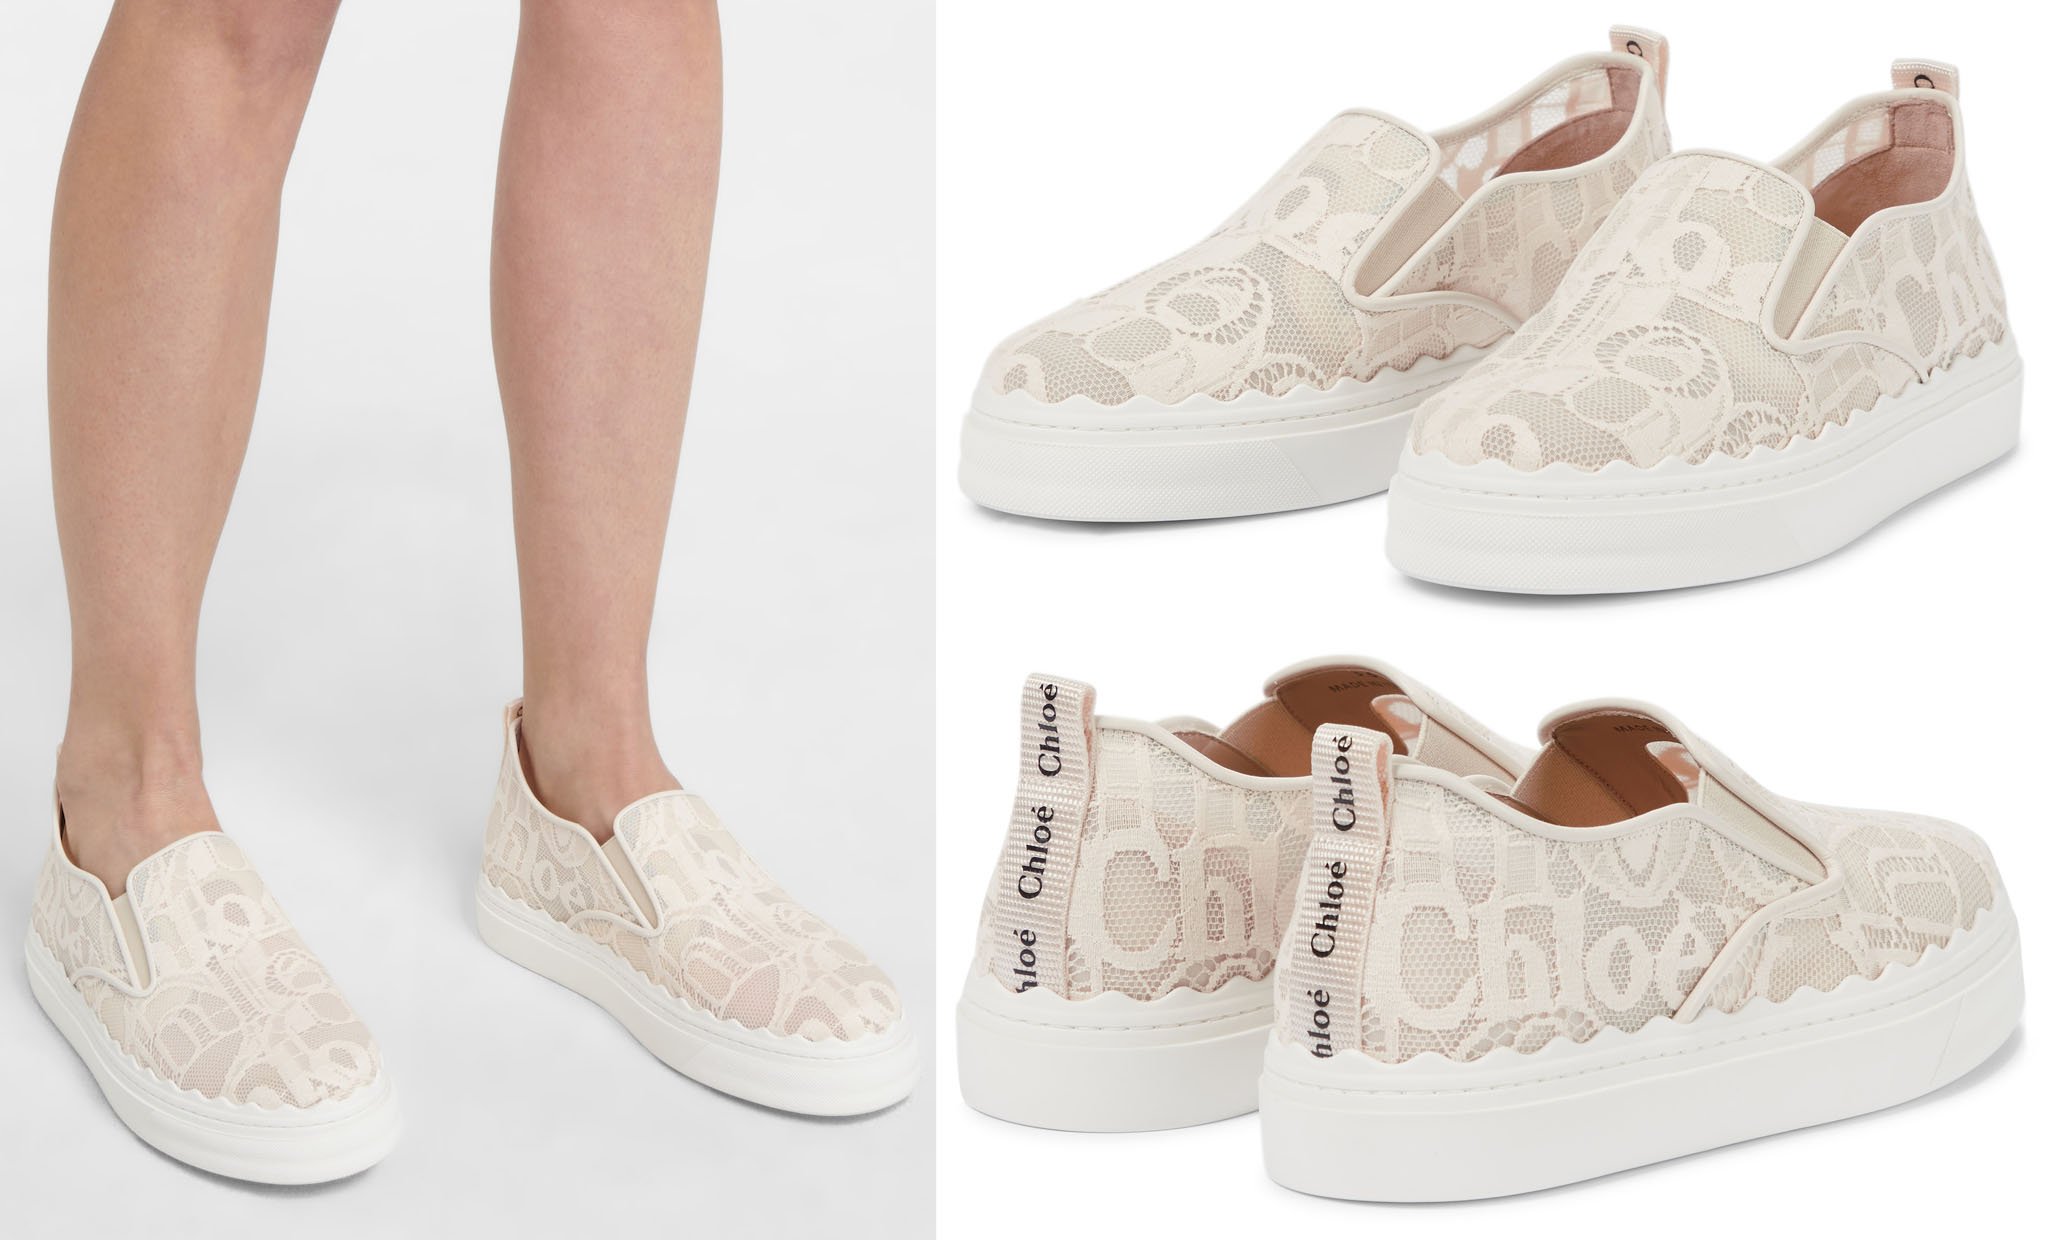 Chloe updates its signature slip-on sneakers in intricate, logo-adorned lace with scalloped trims for an ultra-feminine finish